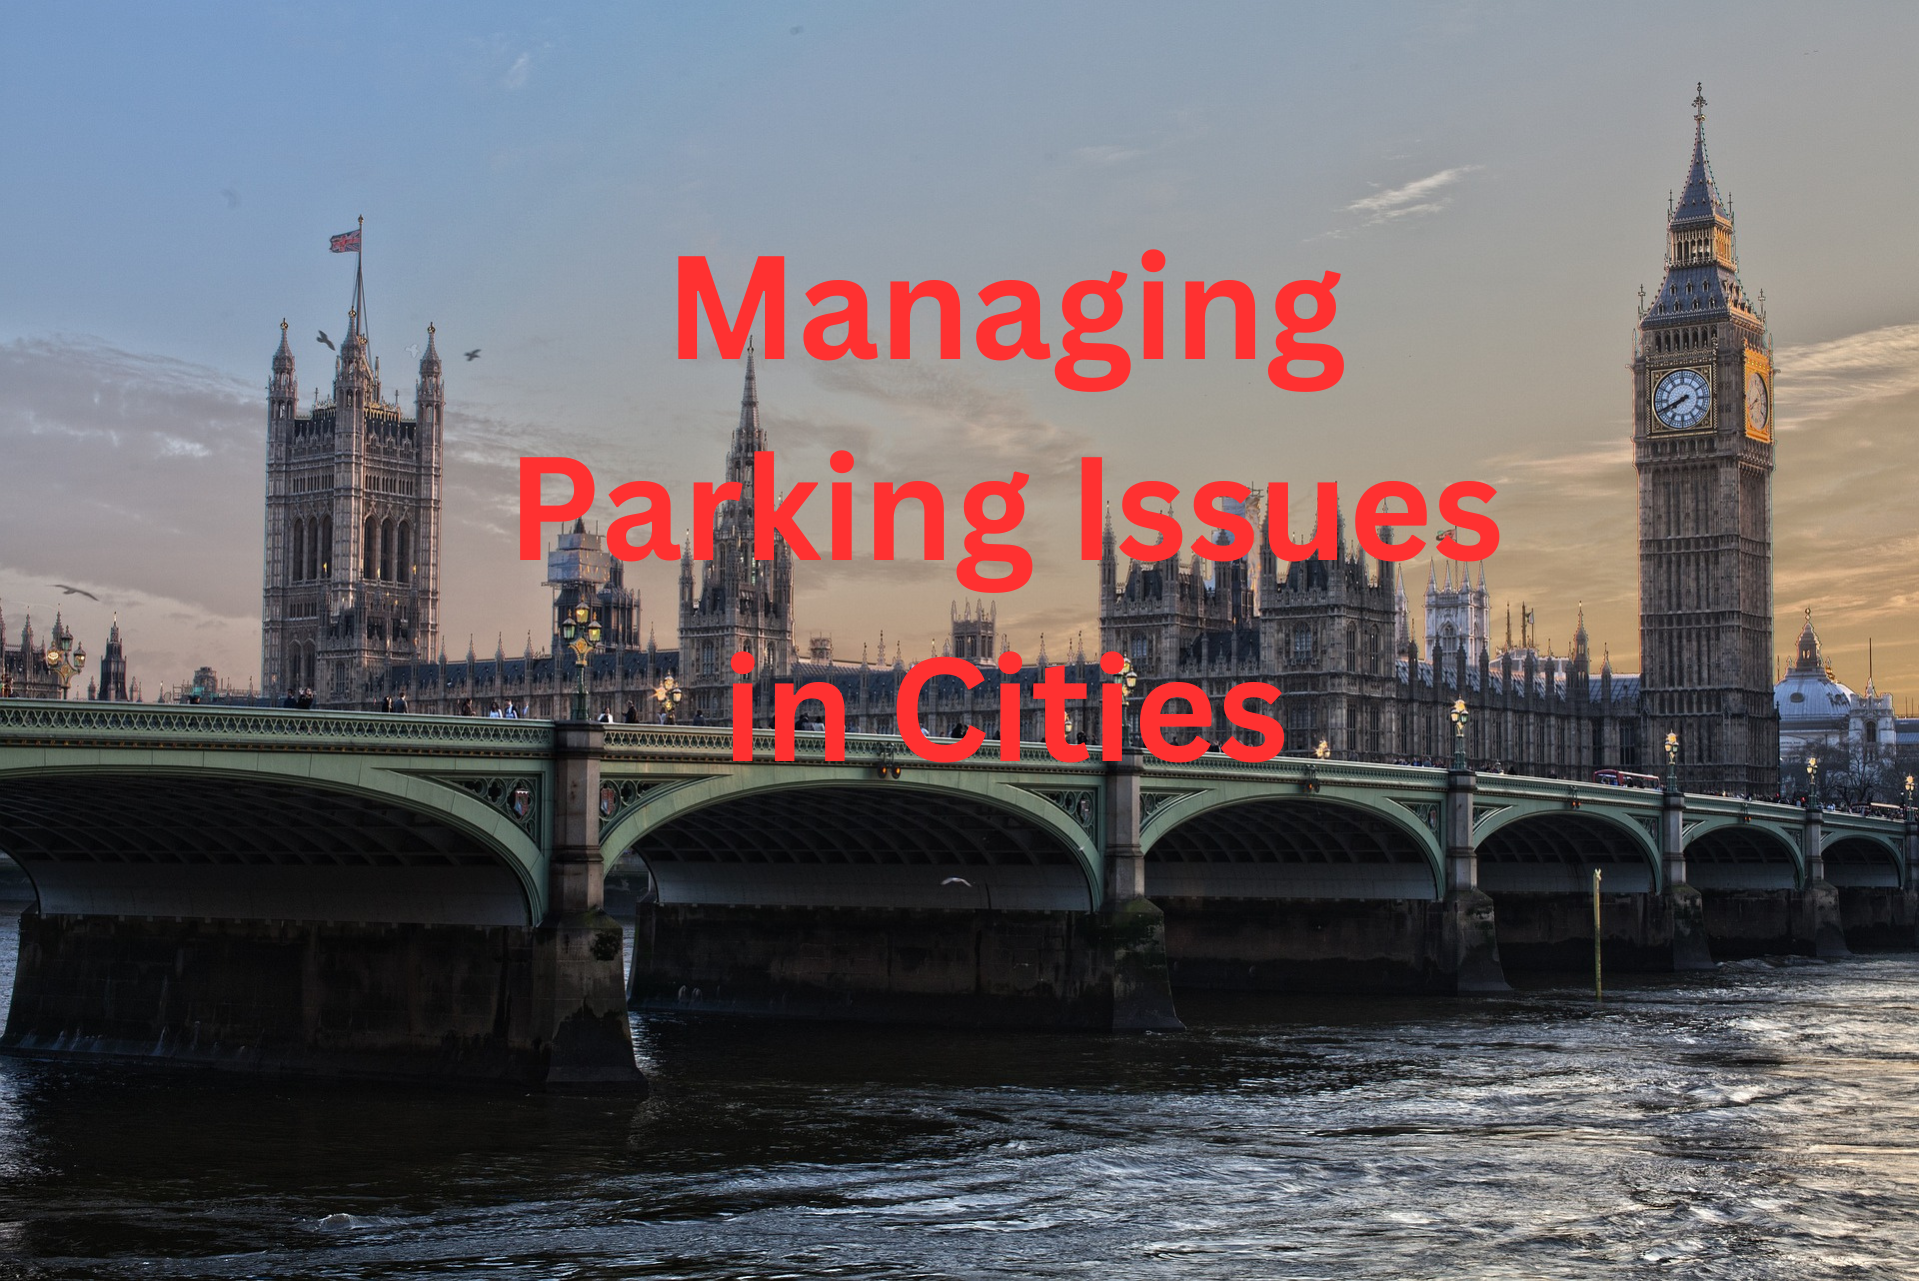 Managing Parking Issues in Cities